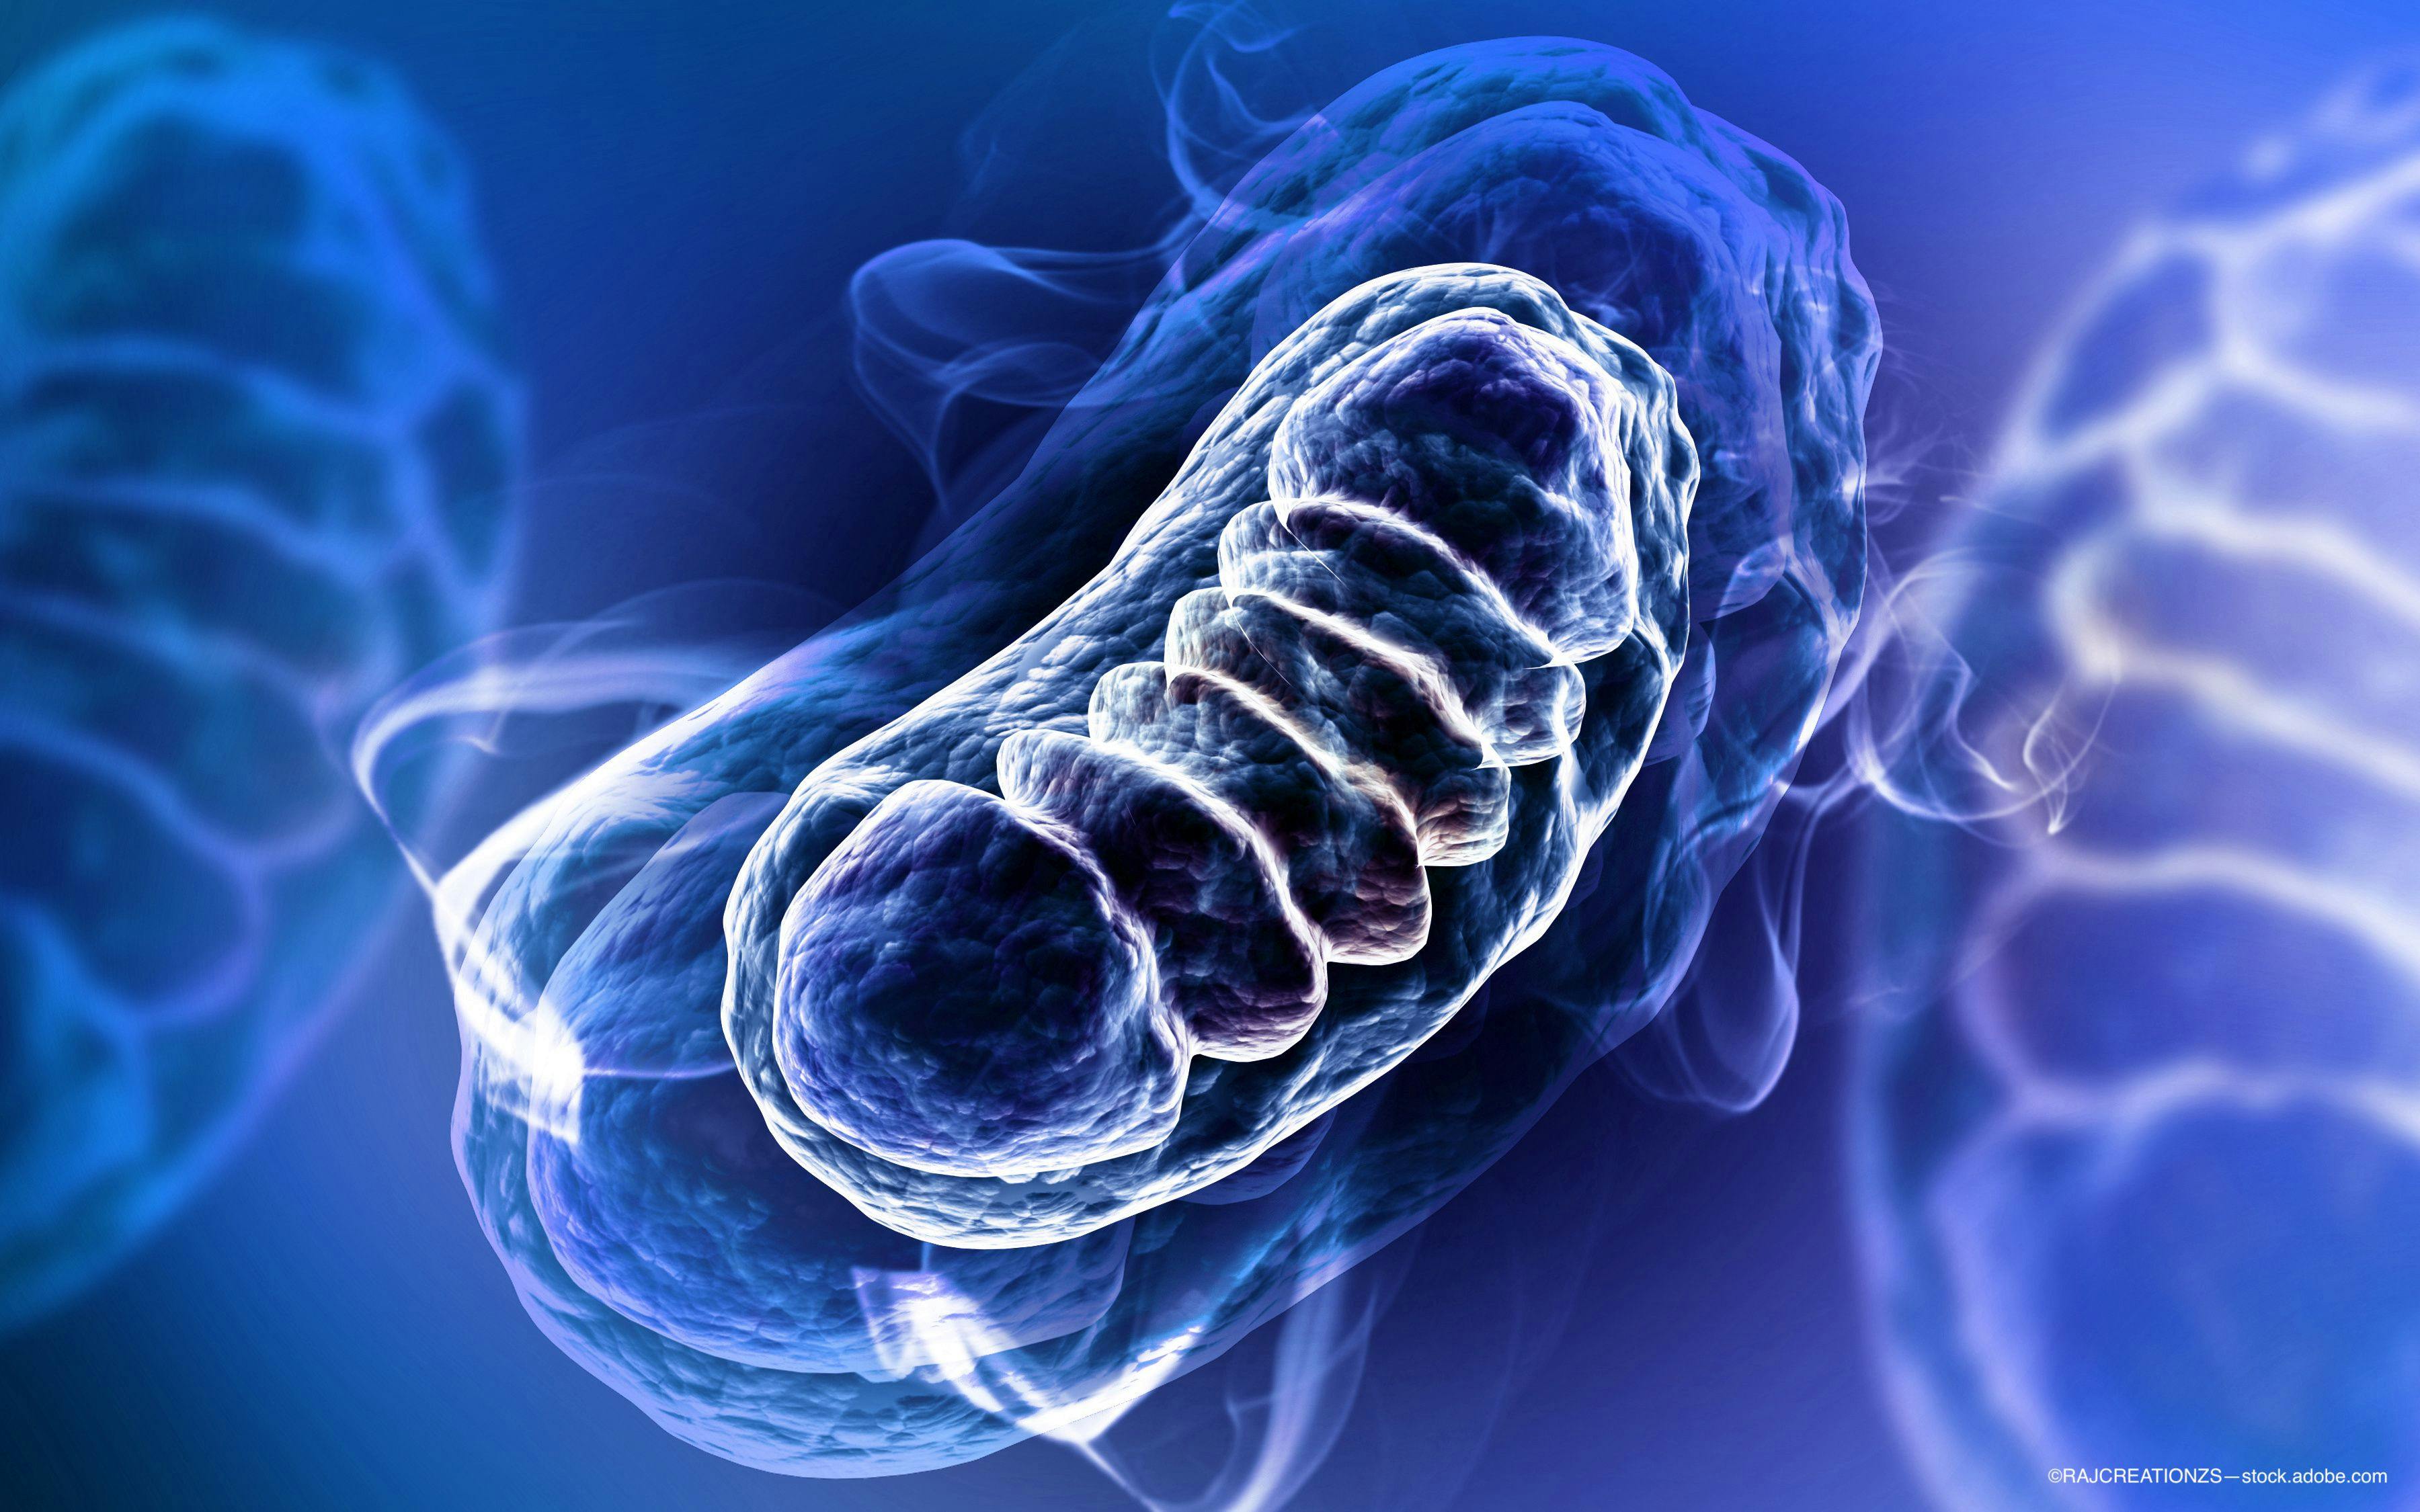 Protecting mitochondria with elamipretide